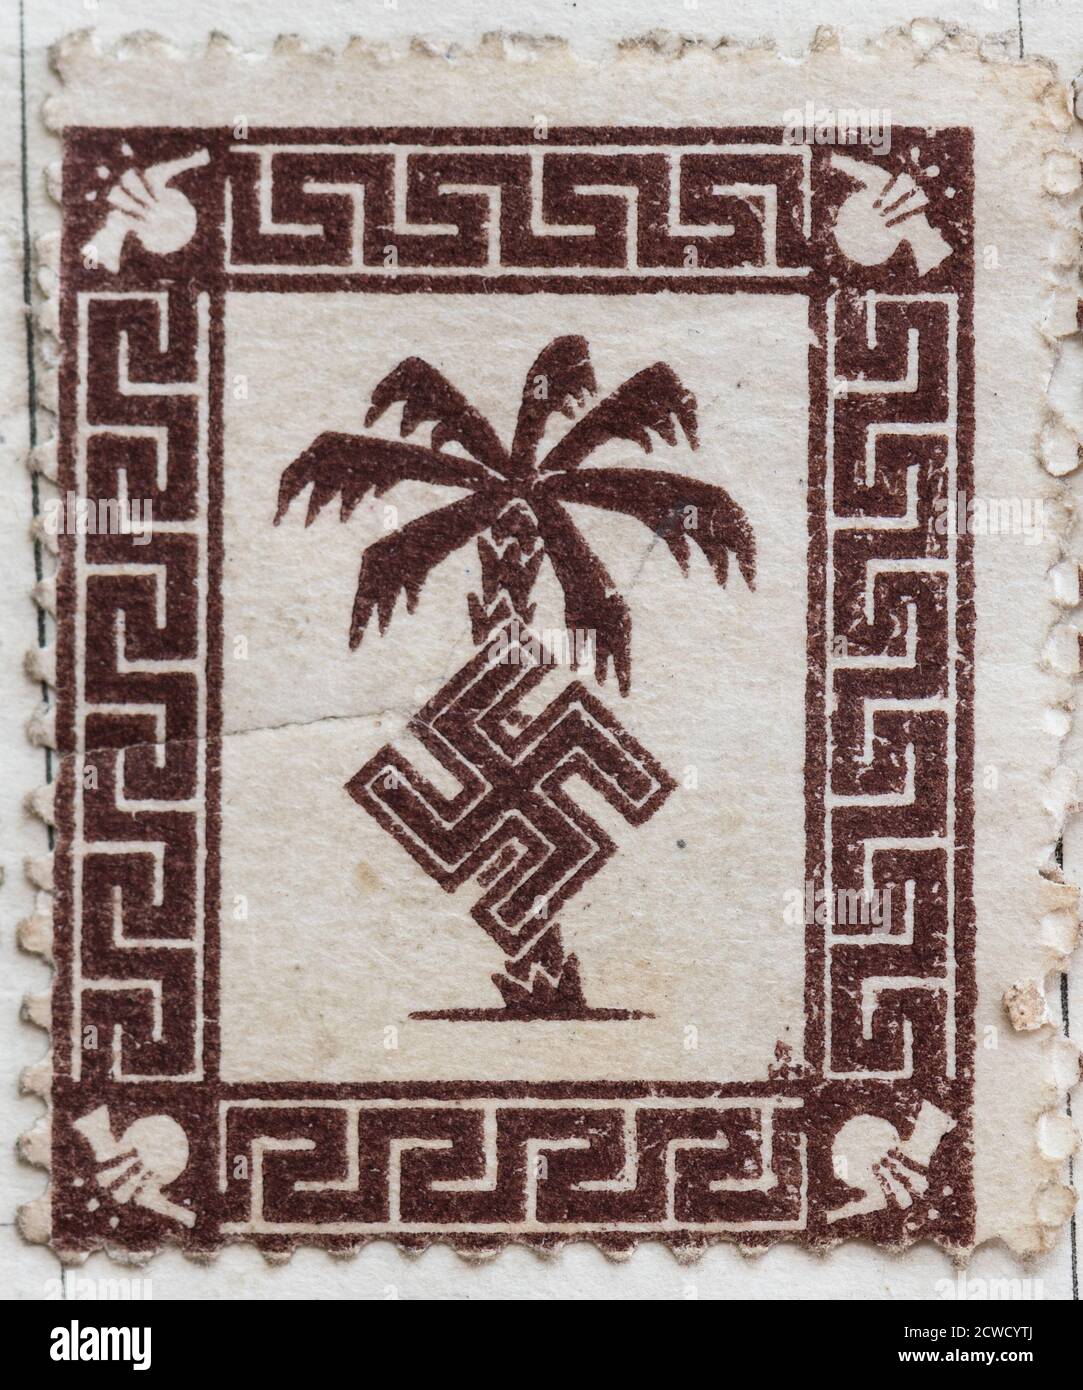 The Rommel 'Afrika Korps' a Feldpost (German military mail service) stamp given to German soldiers serving in north Africa to mail packages home Stock Photo